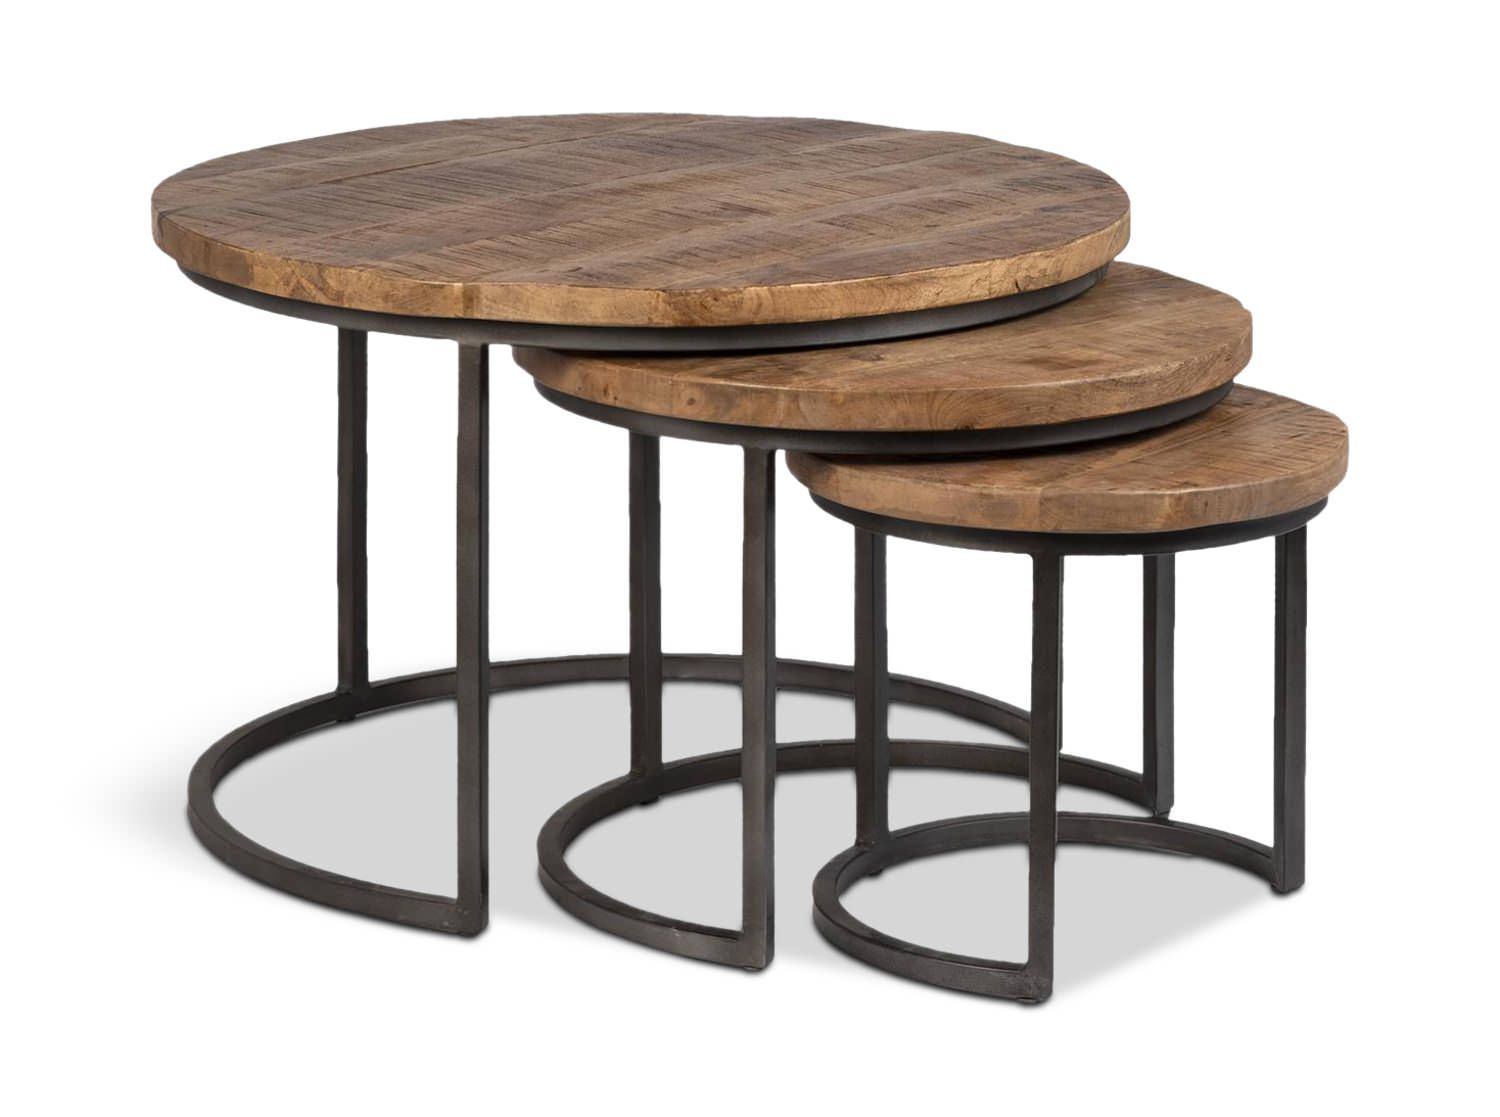 Shelby Nesting Coffee Tables | Hom Furniture With Coffee Tables Of 3 Nesting Tables (View 2 of 15)